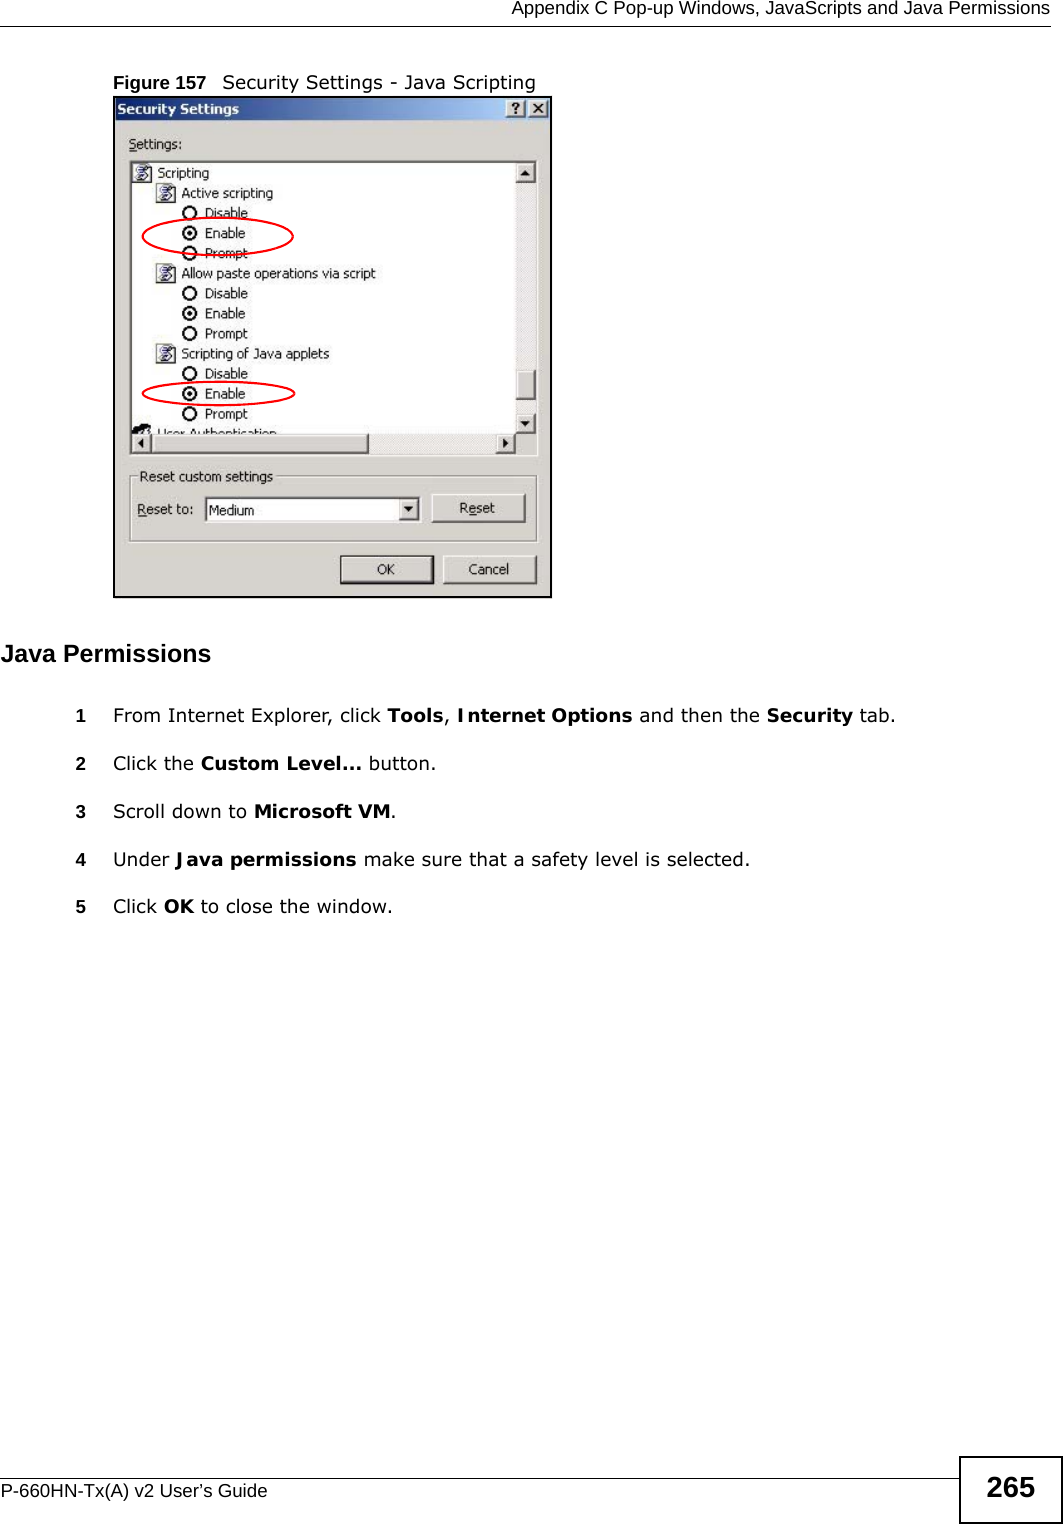  Appendix C Pop-up Windows, JavaScripts and Java PermissionsP-660HN-Tx(A) v2 User’s Guide 265Figure 157   Security Settings - Java ScriptingJava Permissions1From Internet Explorer, click Tools, Internet Options and then the Security tab. 2Click the Custom Level... button. 3Scroll down to Microsoft VM. 4Under Java permissions make sure that a safety level is selected.5Click OK to close the window.